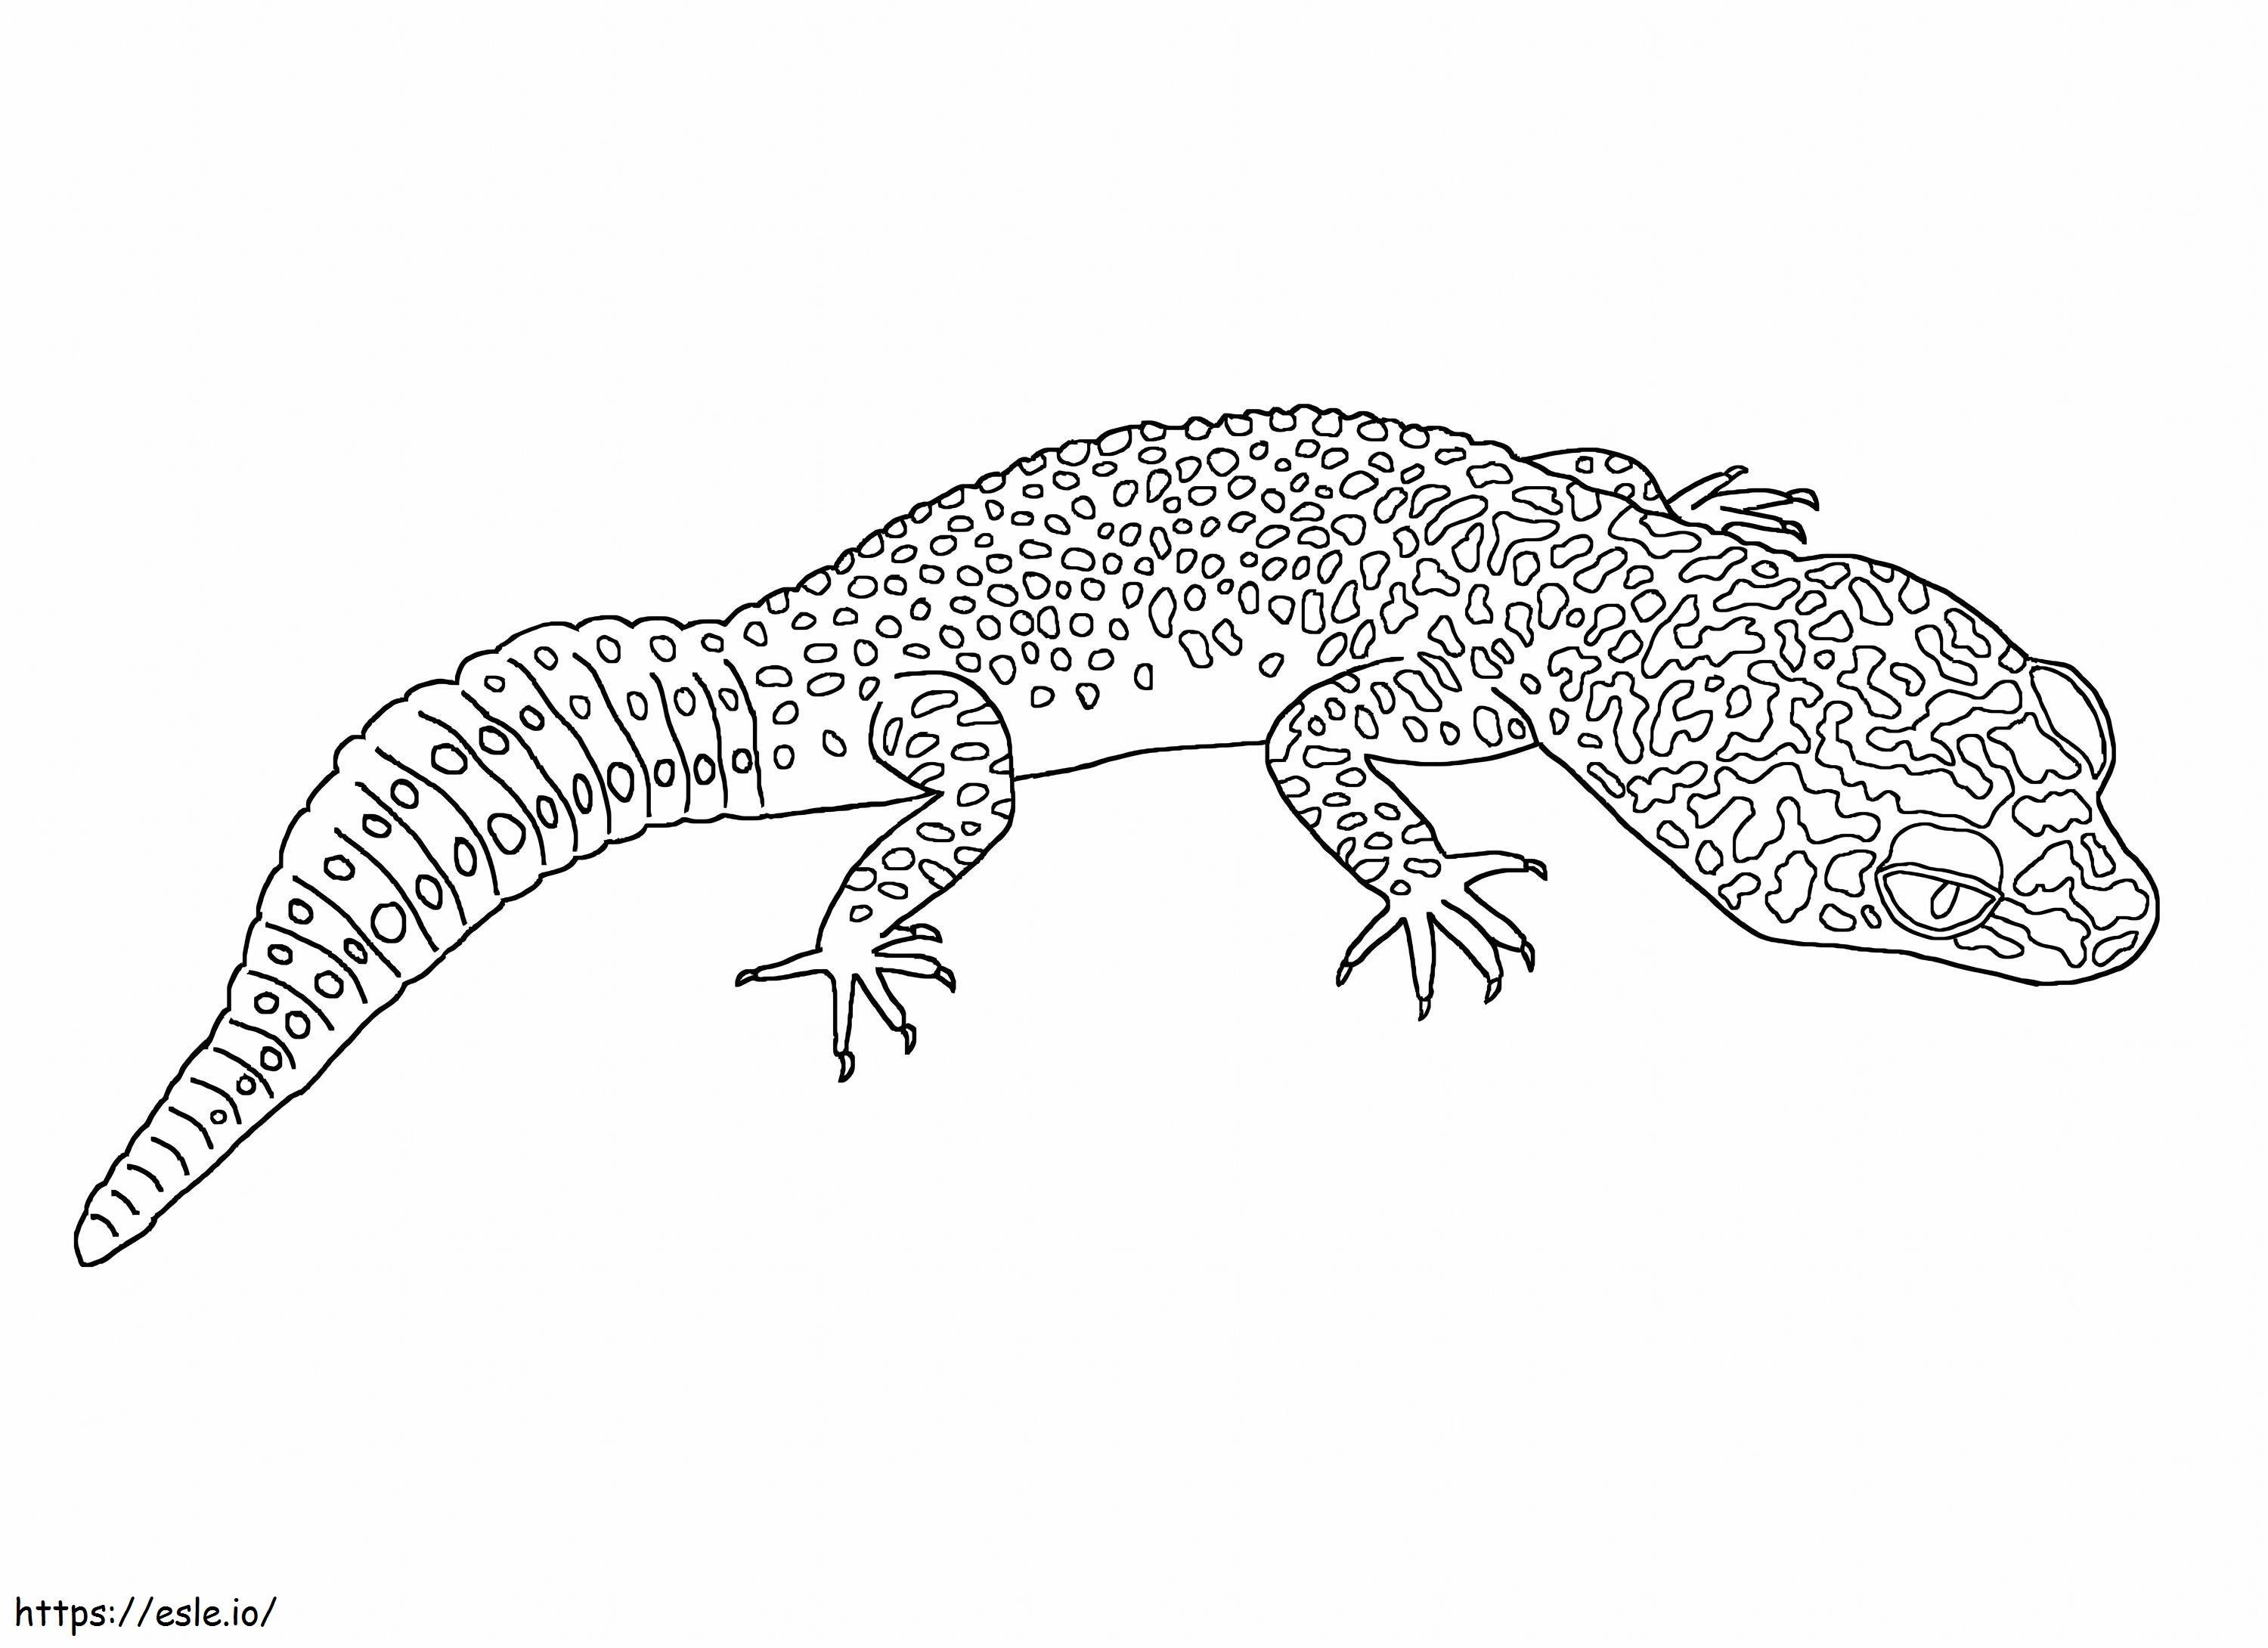 Leopard Gecko coloring page